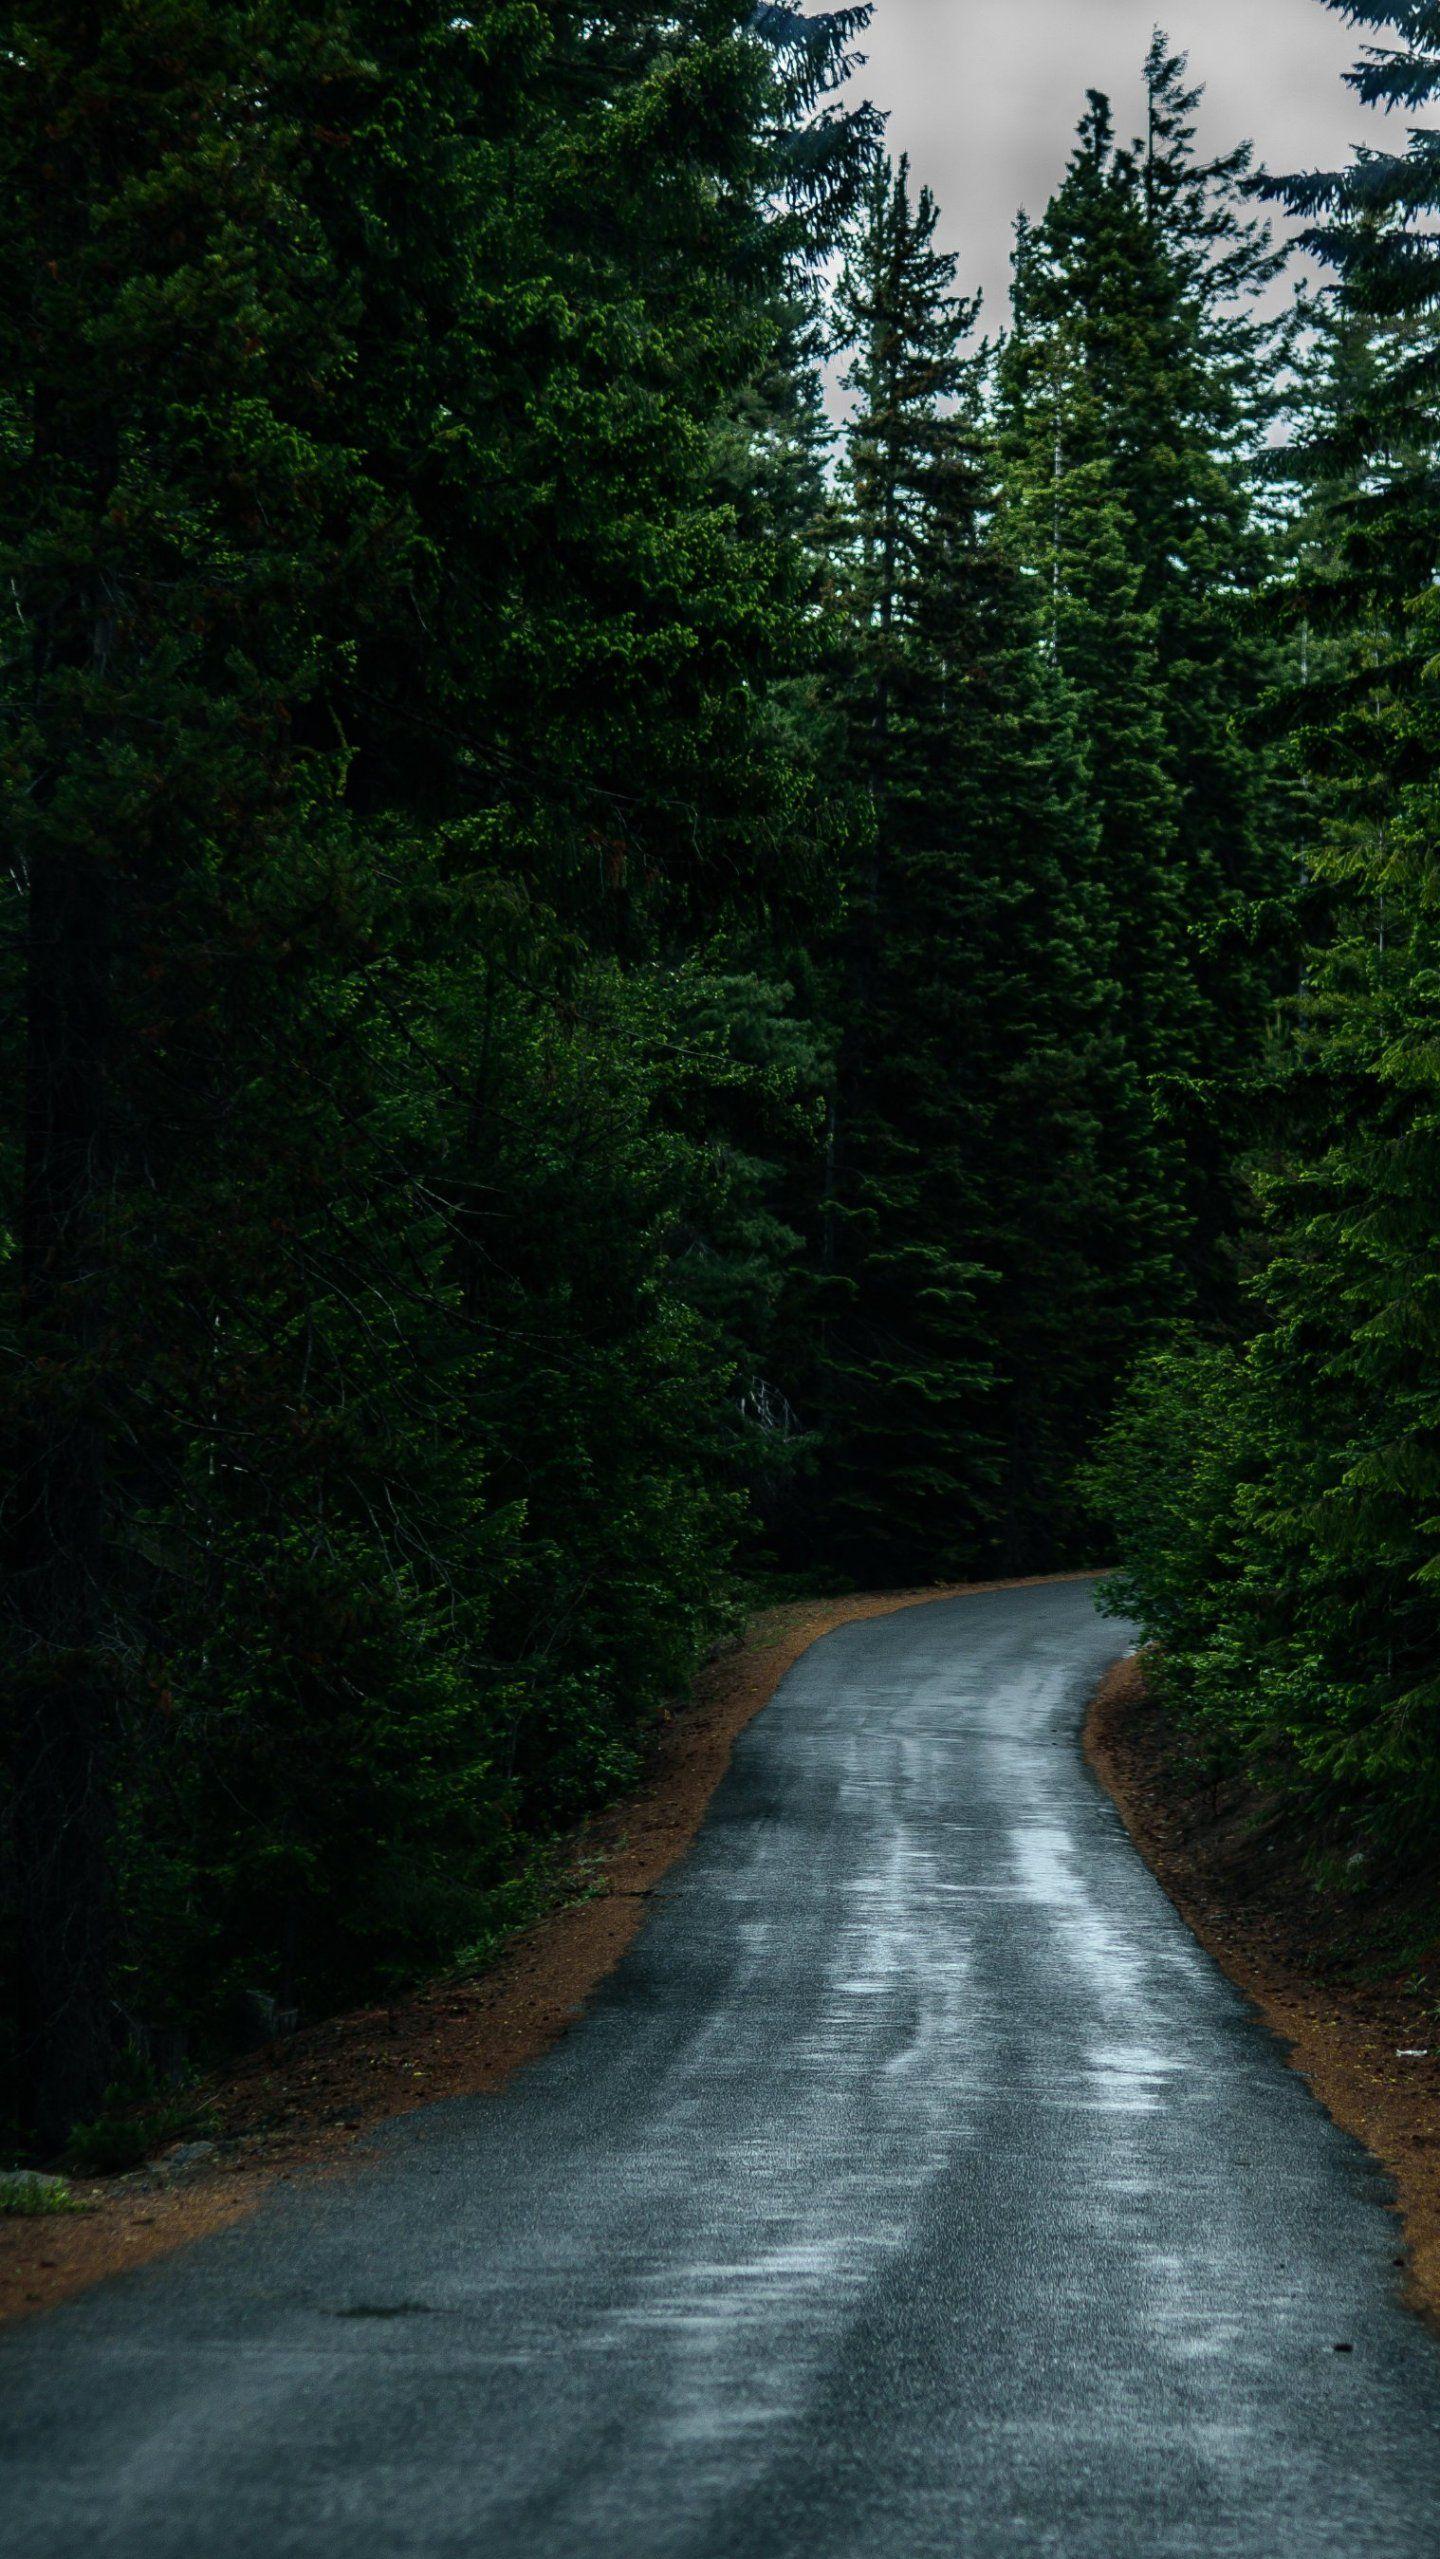 Road Through Forest Wallpaper   iPhone Android Desktop